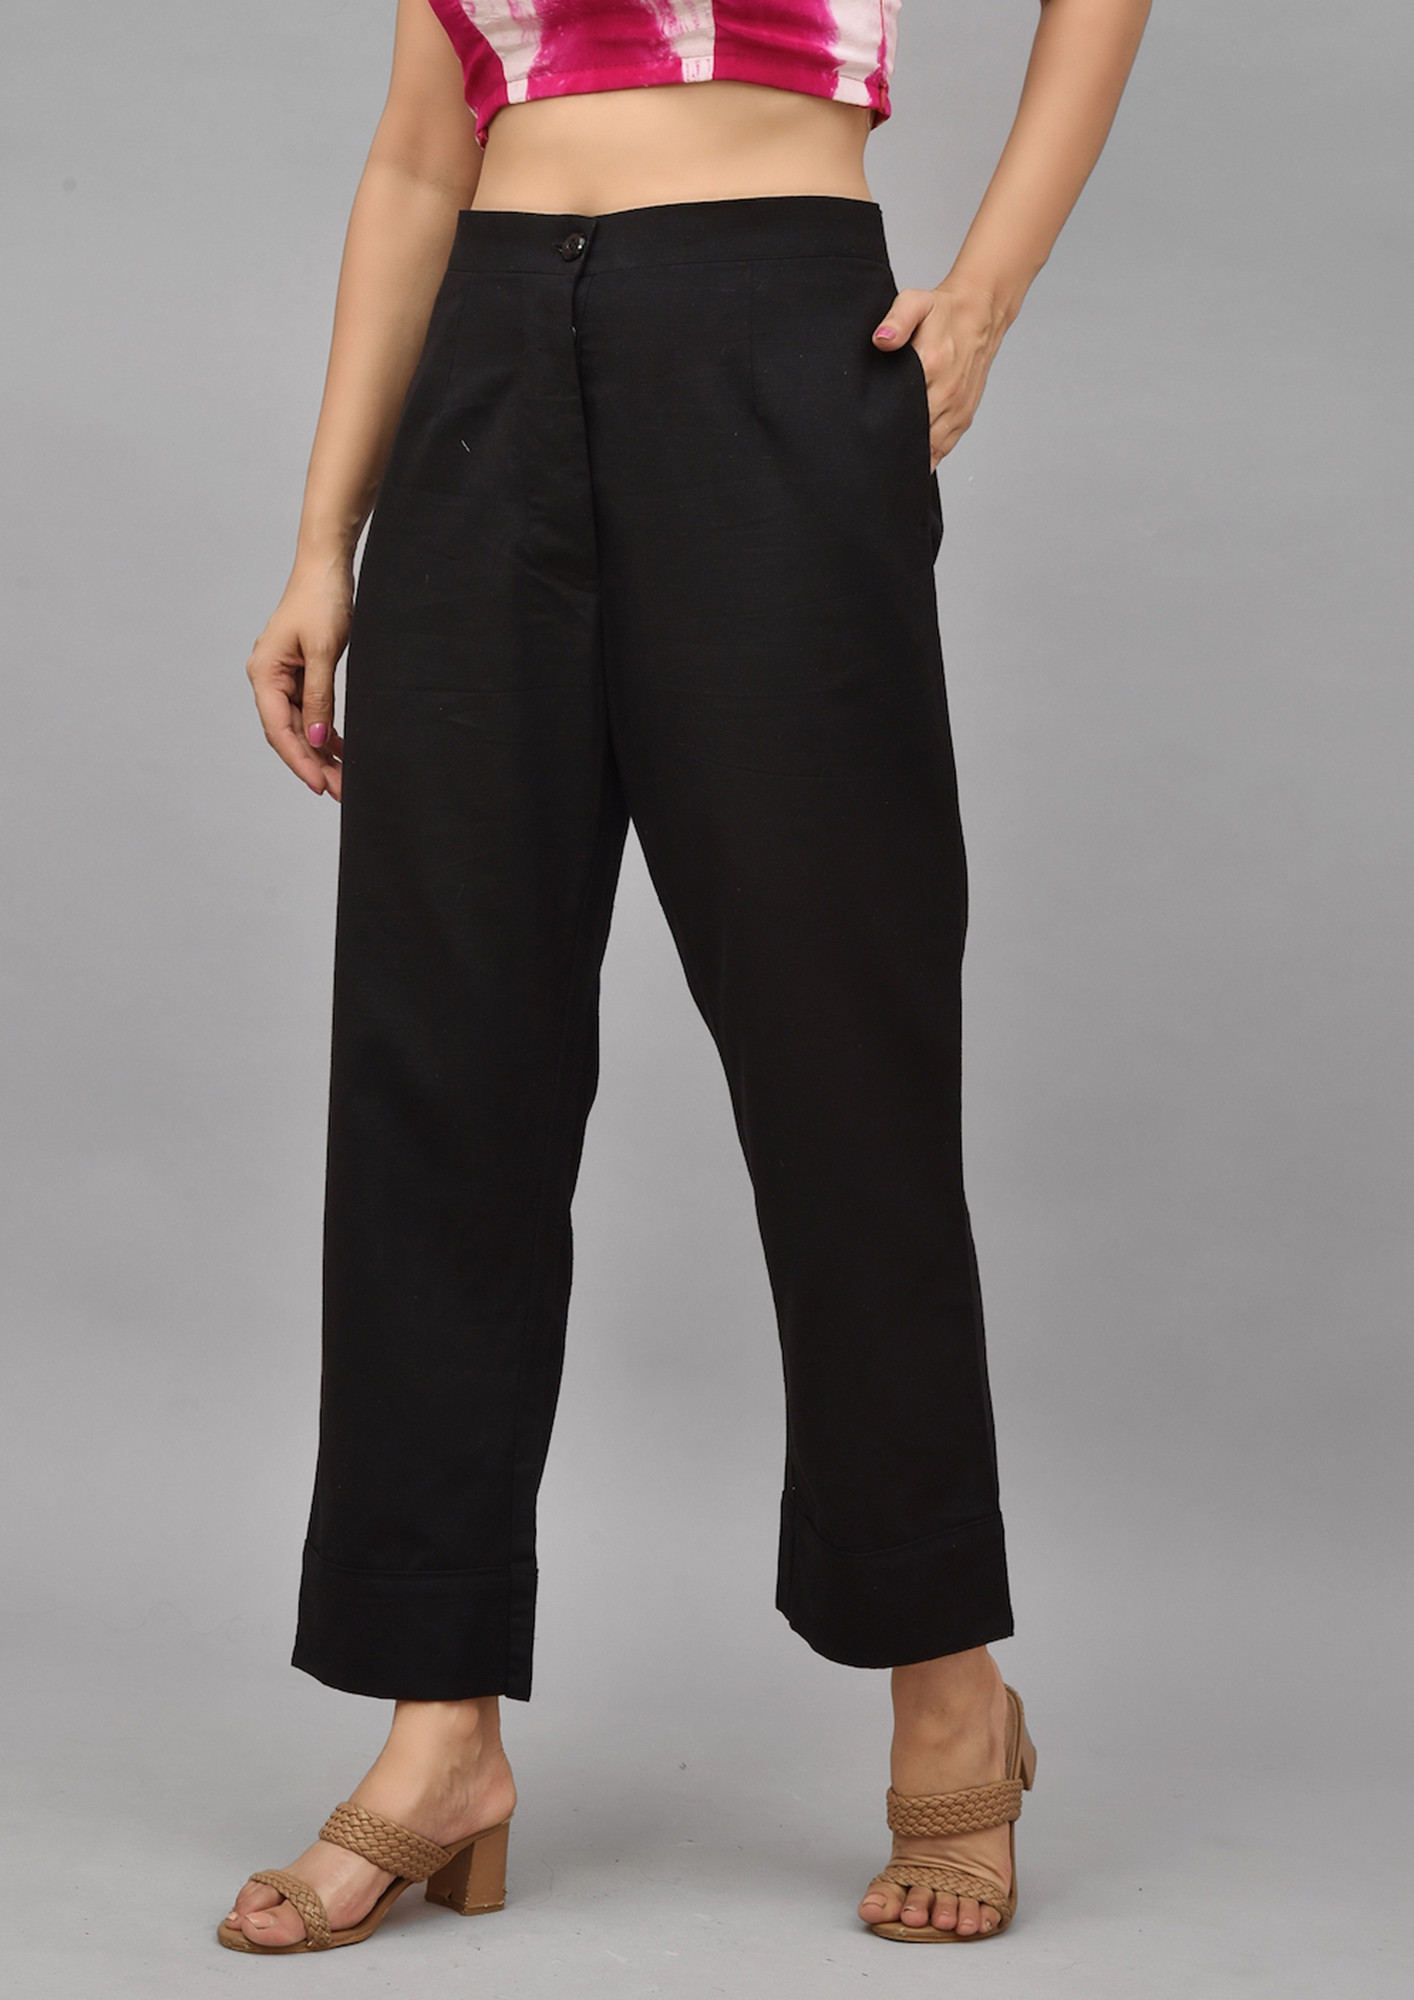 Buy Black Parallel Pants Online - W for Woman